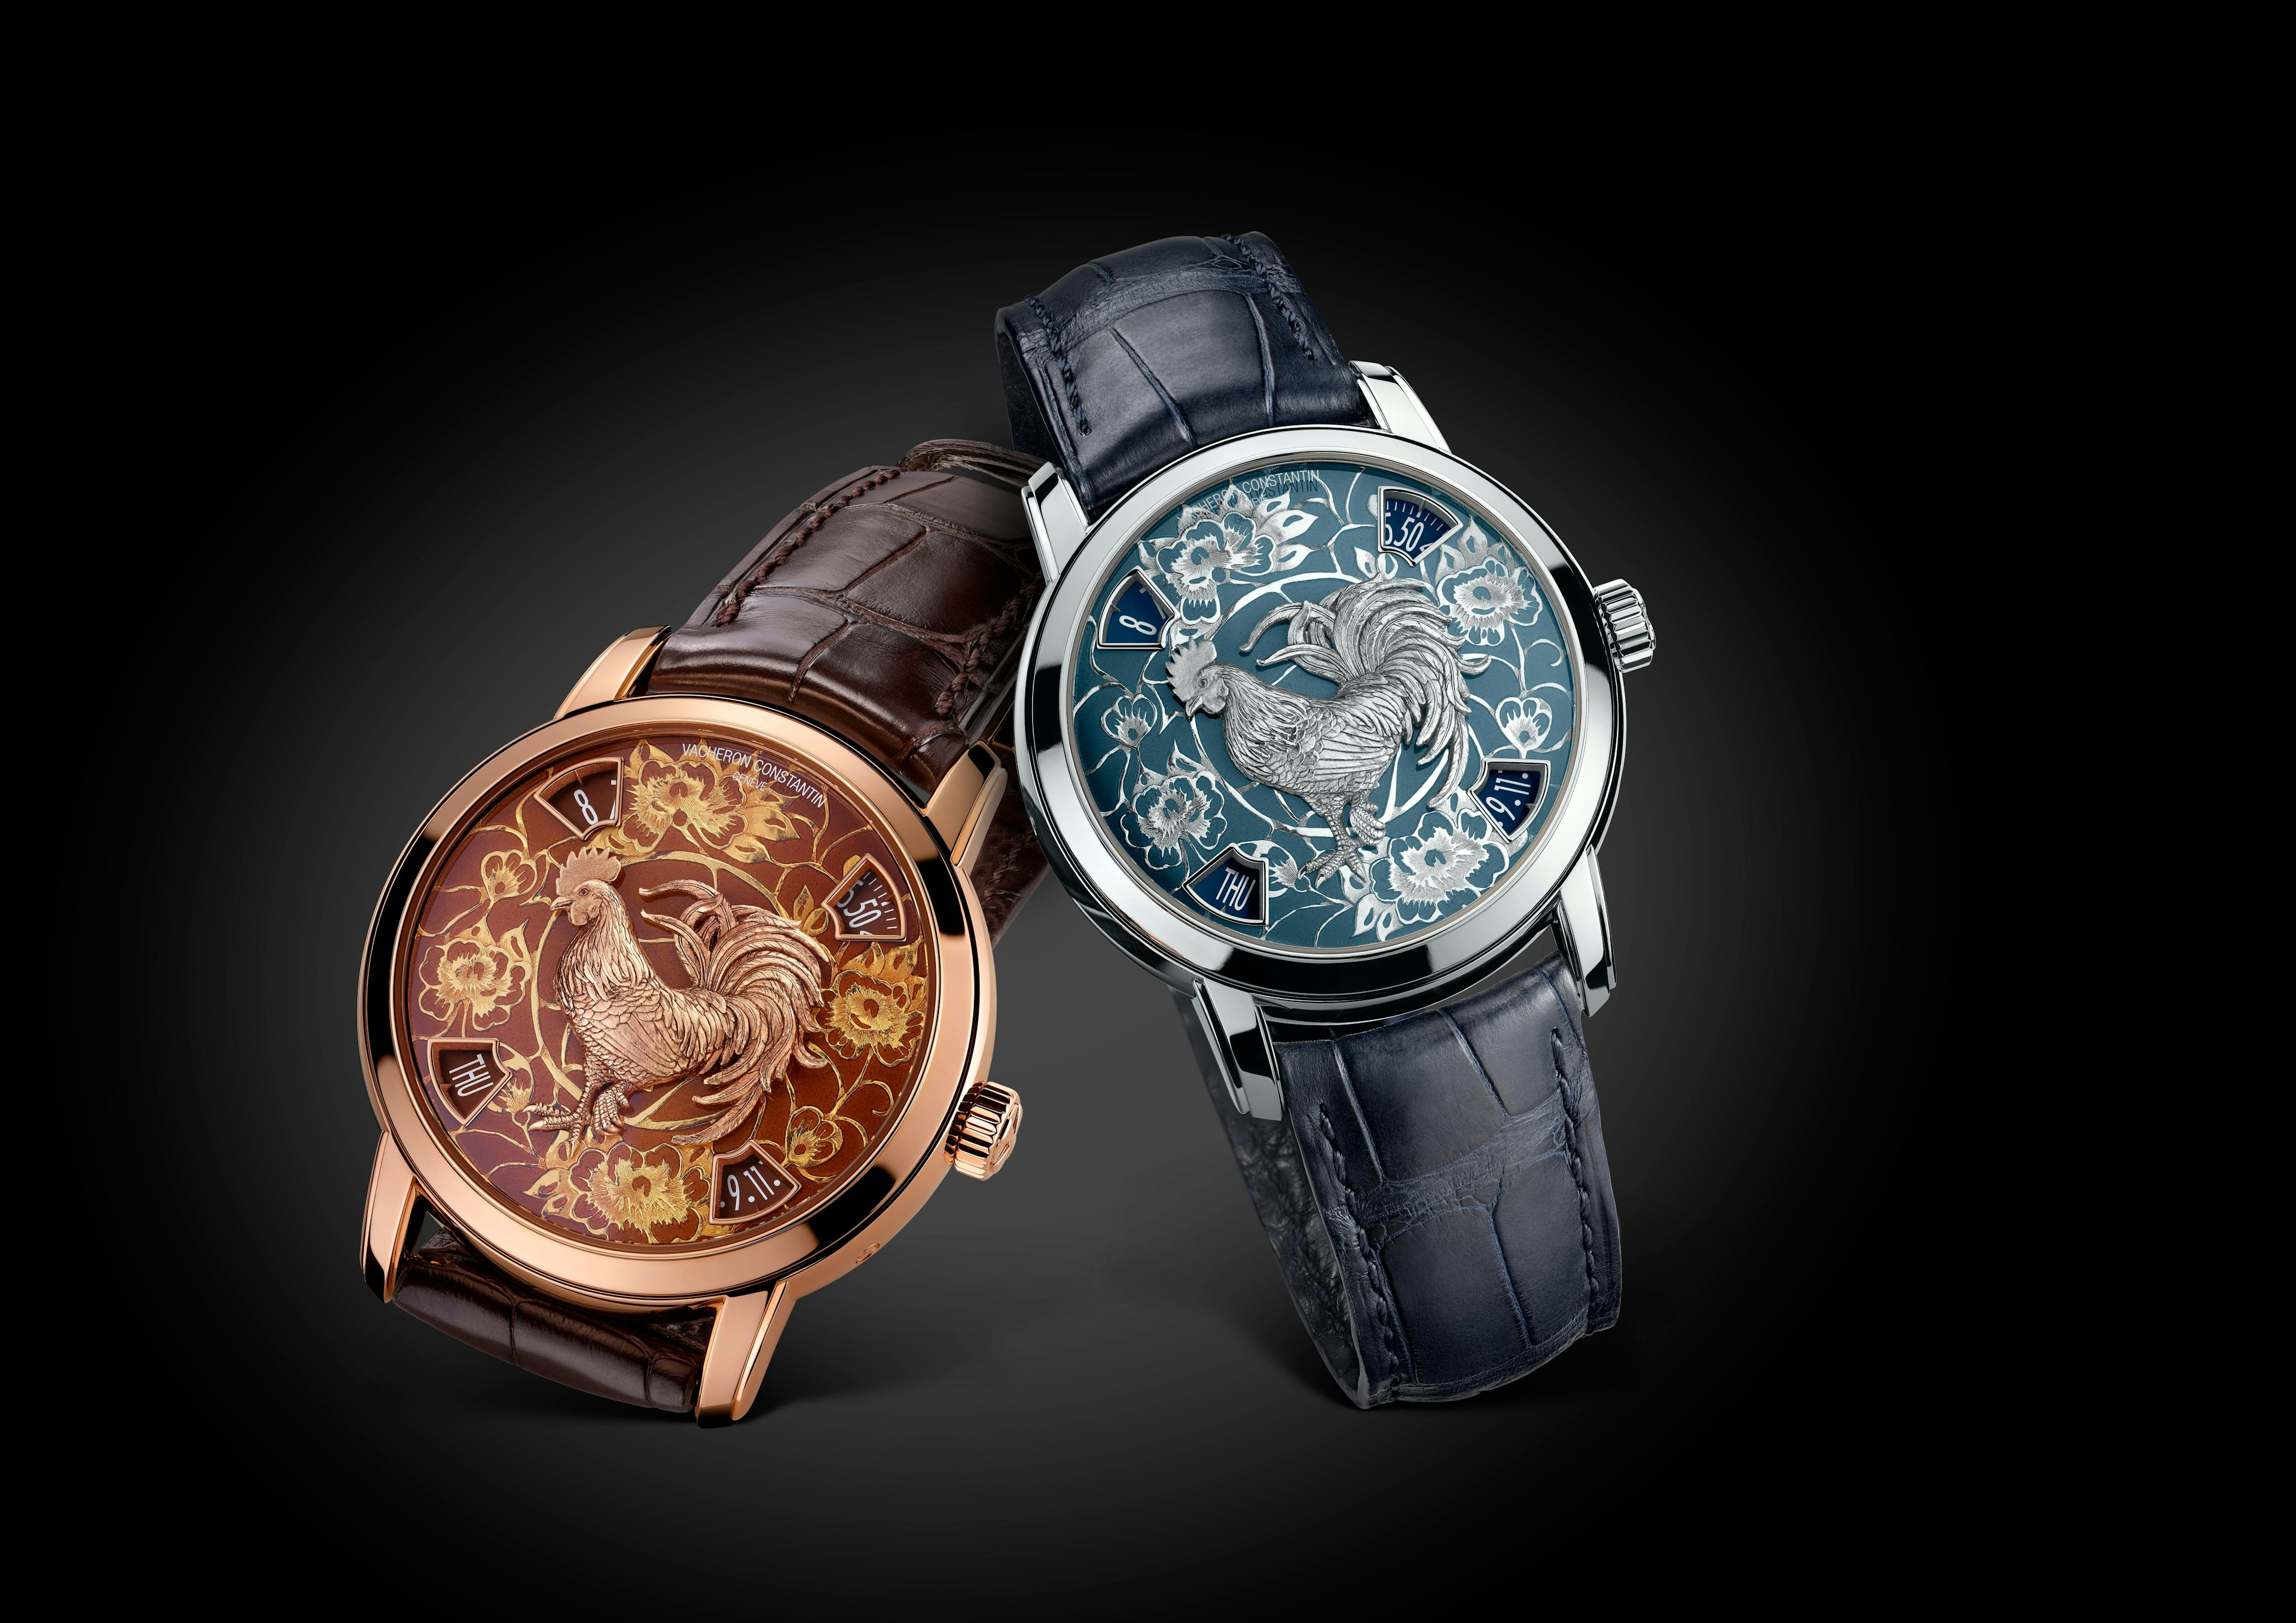 Vacheron Constantin's Métiers d’Art Legend of the Chinese Zodiac Year of the Rooster watches in rose gold and platinum. (Courtesy Photos)